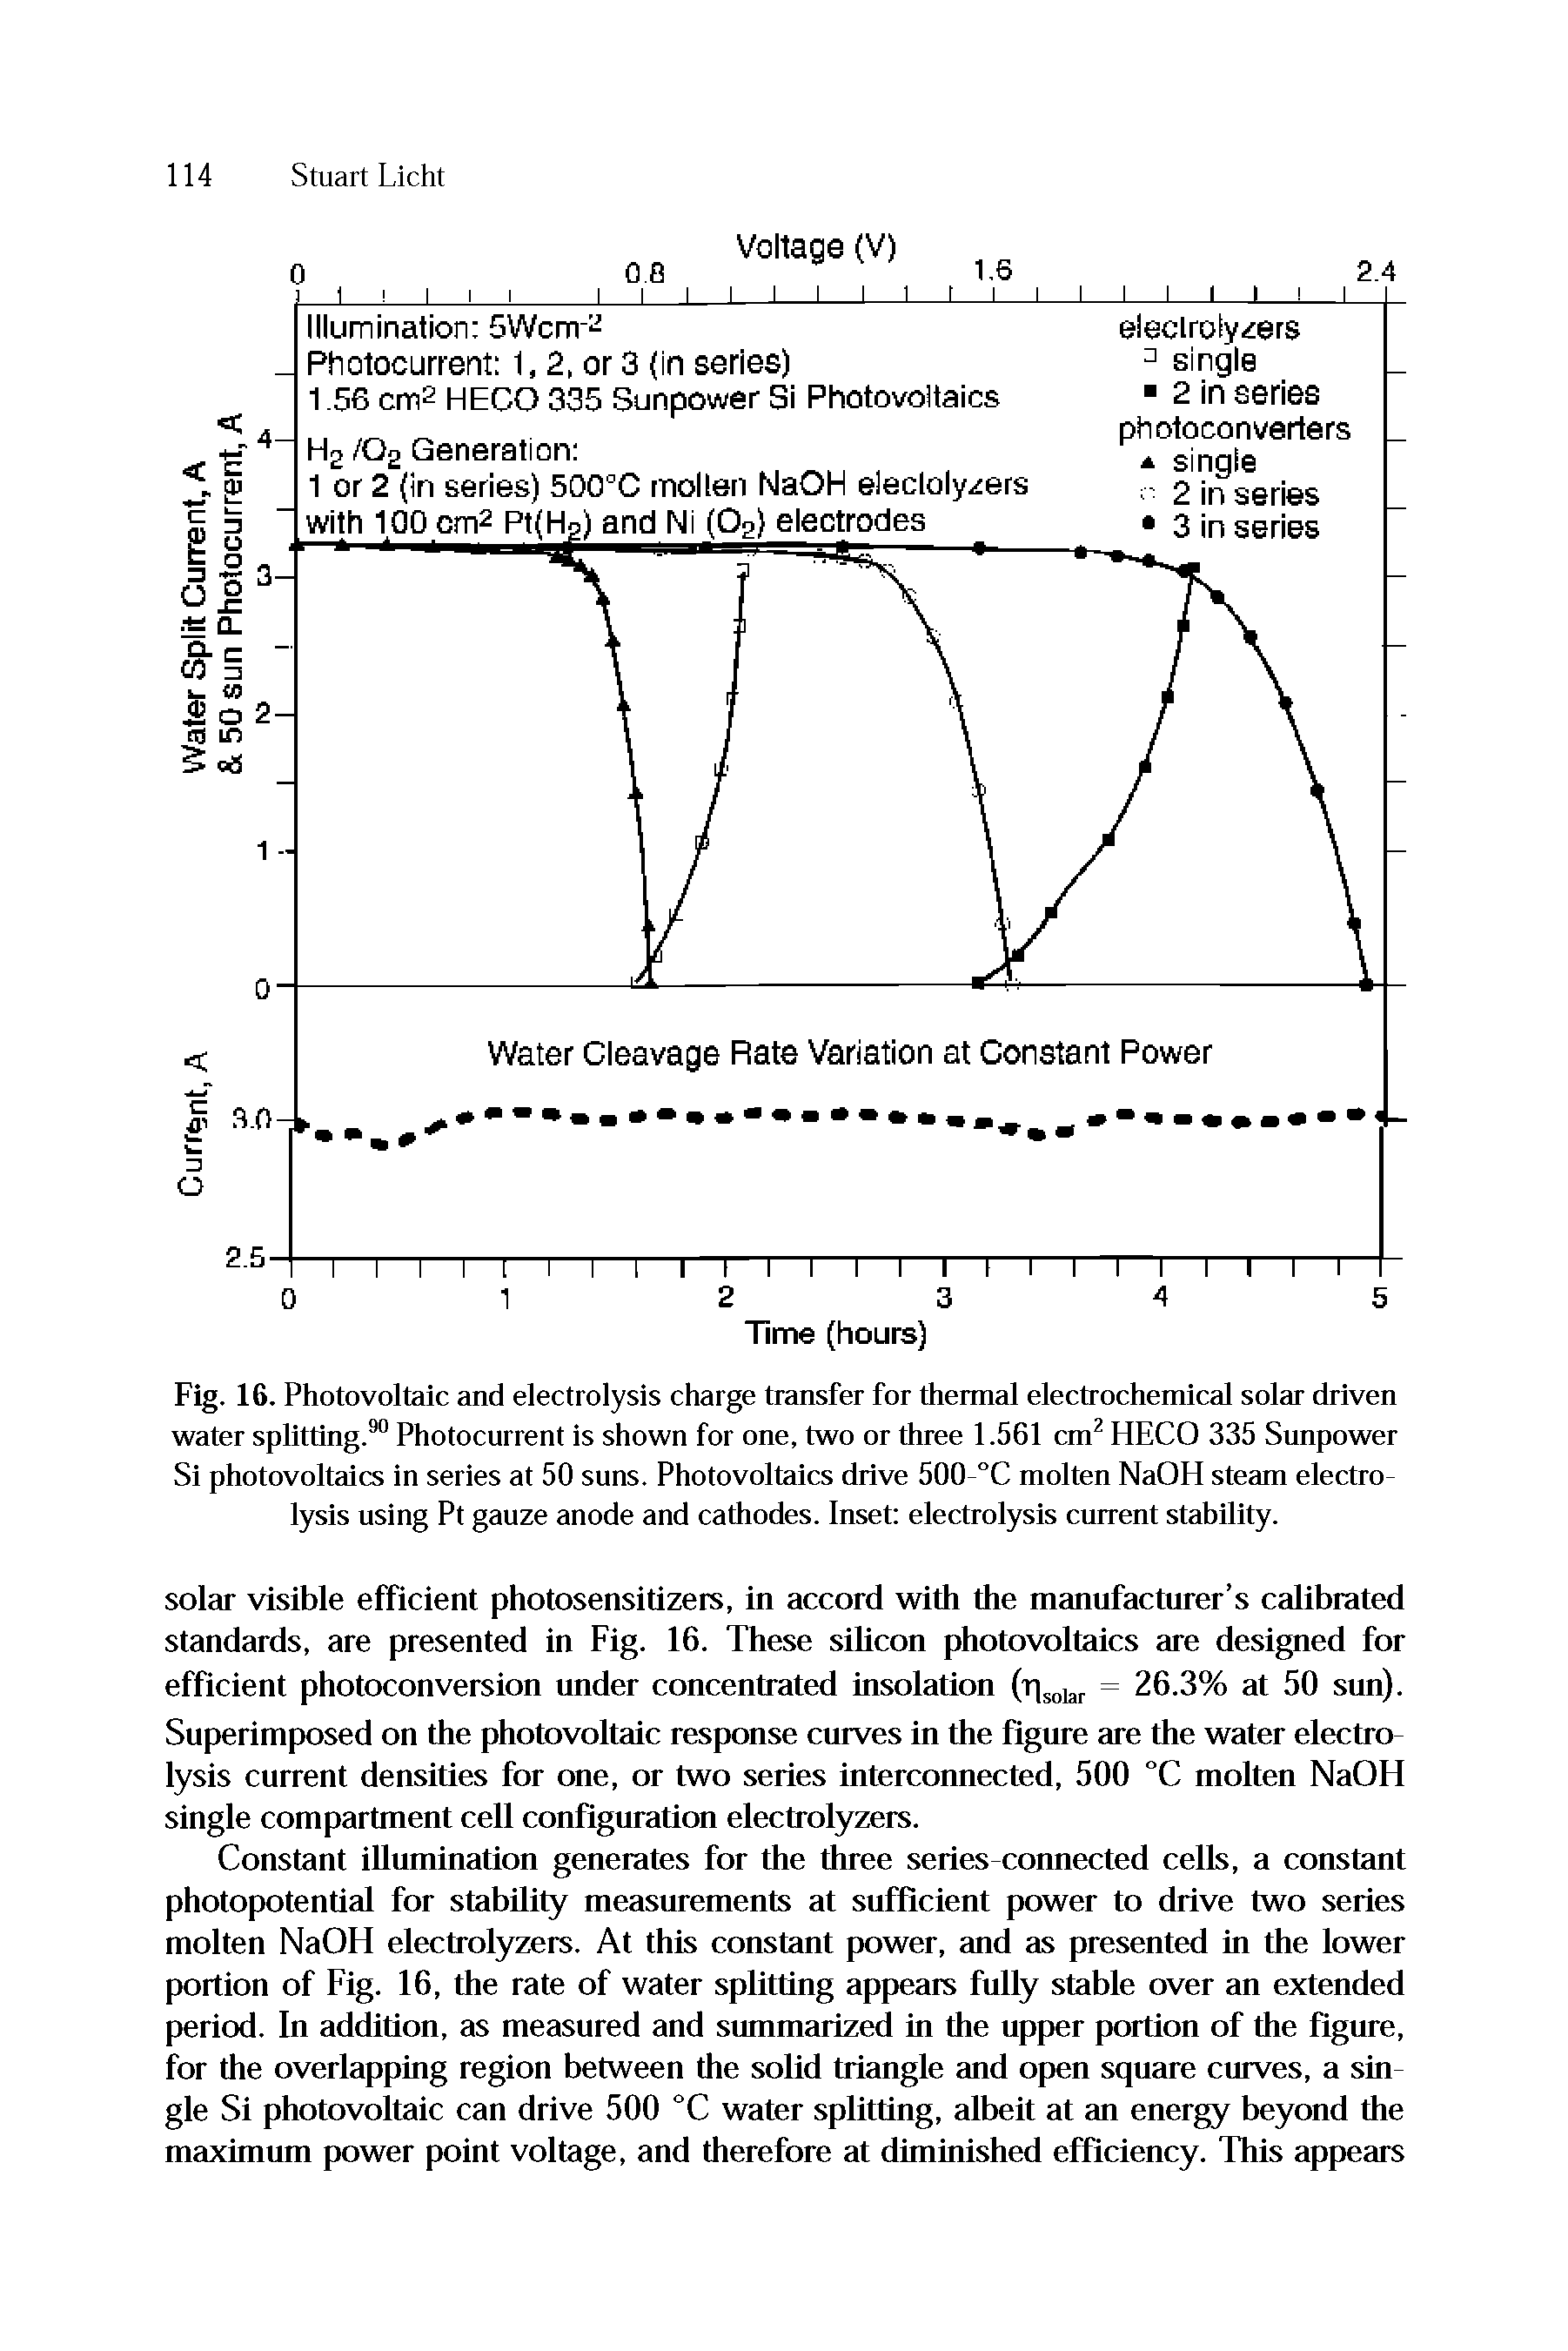 Fig. 16. Photovoltaic and electrolysis charge transfer for thermal electrochemical solar driven water splitting.90 Photocurrent is shown for one, two or three 1.561 cm2 HECO 335 Sunpower Si photovoltaics in series at 50 suns. Photovoltaics drive 500-°C molten NaOH steam electrolysis using Pt gauze anode and cathodes. Inset electrolysis current stability.